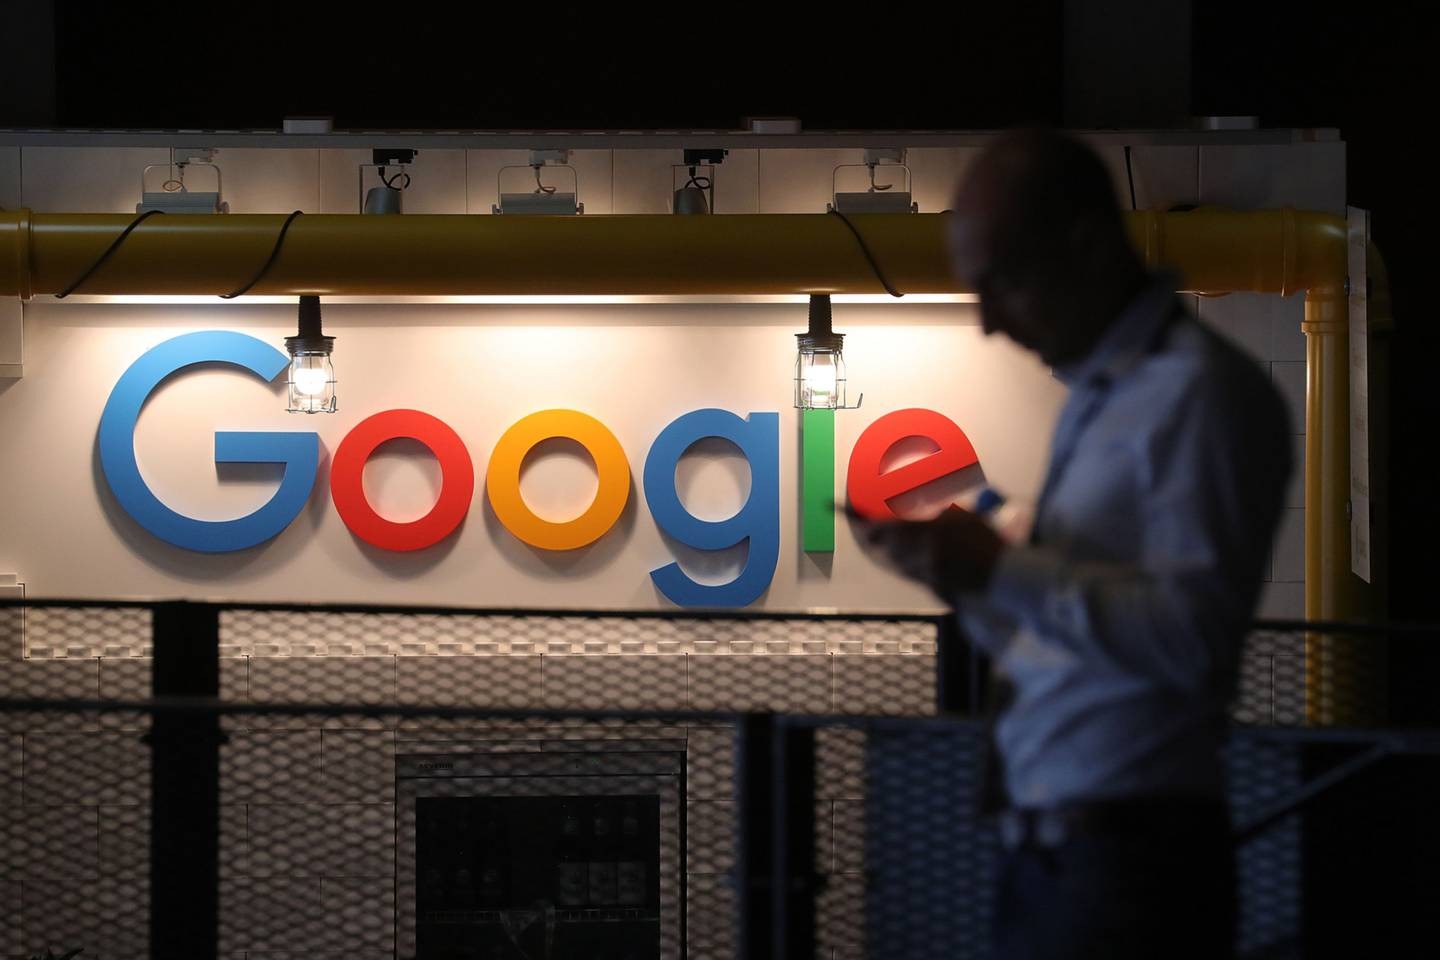 The Delhi High Court Asked Google to Remove Ads That Infringe Trademarks